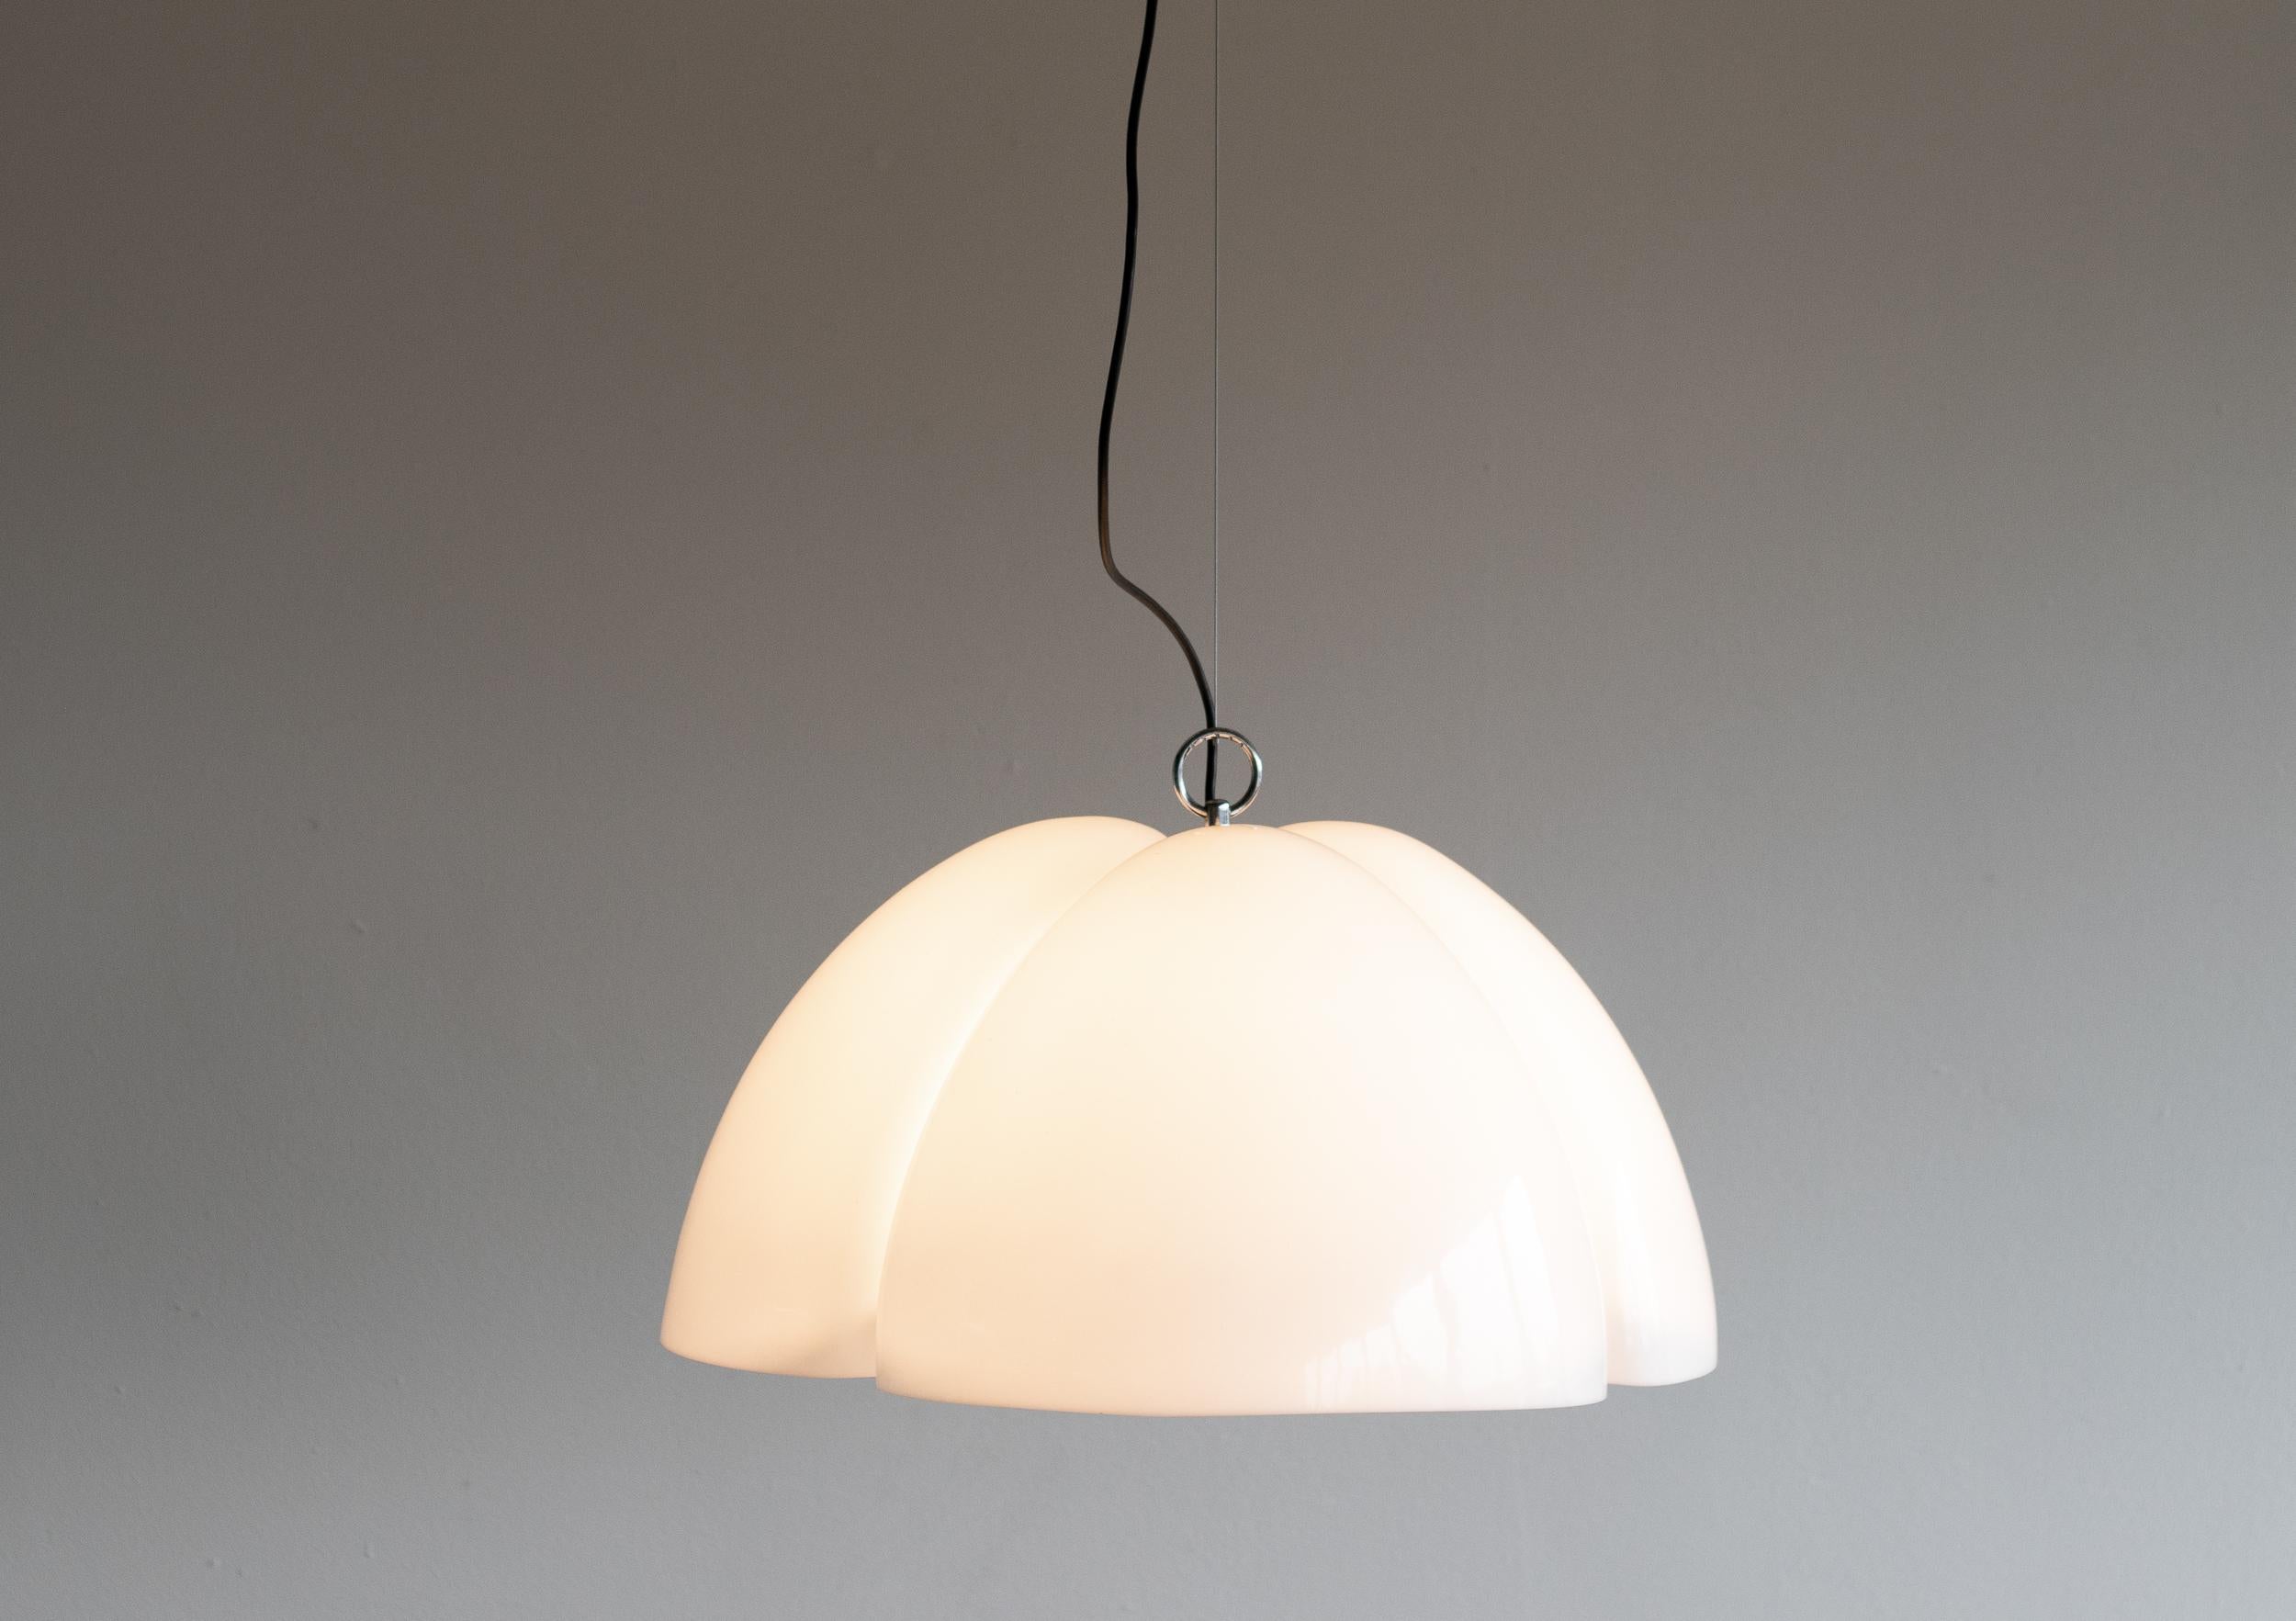 Large pendant light Tricena I by Ingo Maurer for Design M 1968, Munich, Germany  
Pleasant light by the German master of light Ingo Maurer. The Tricena I is the large model available from this Tricena series with a diameter of approximately 23“